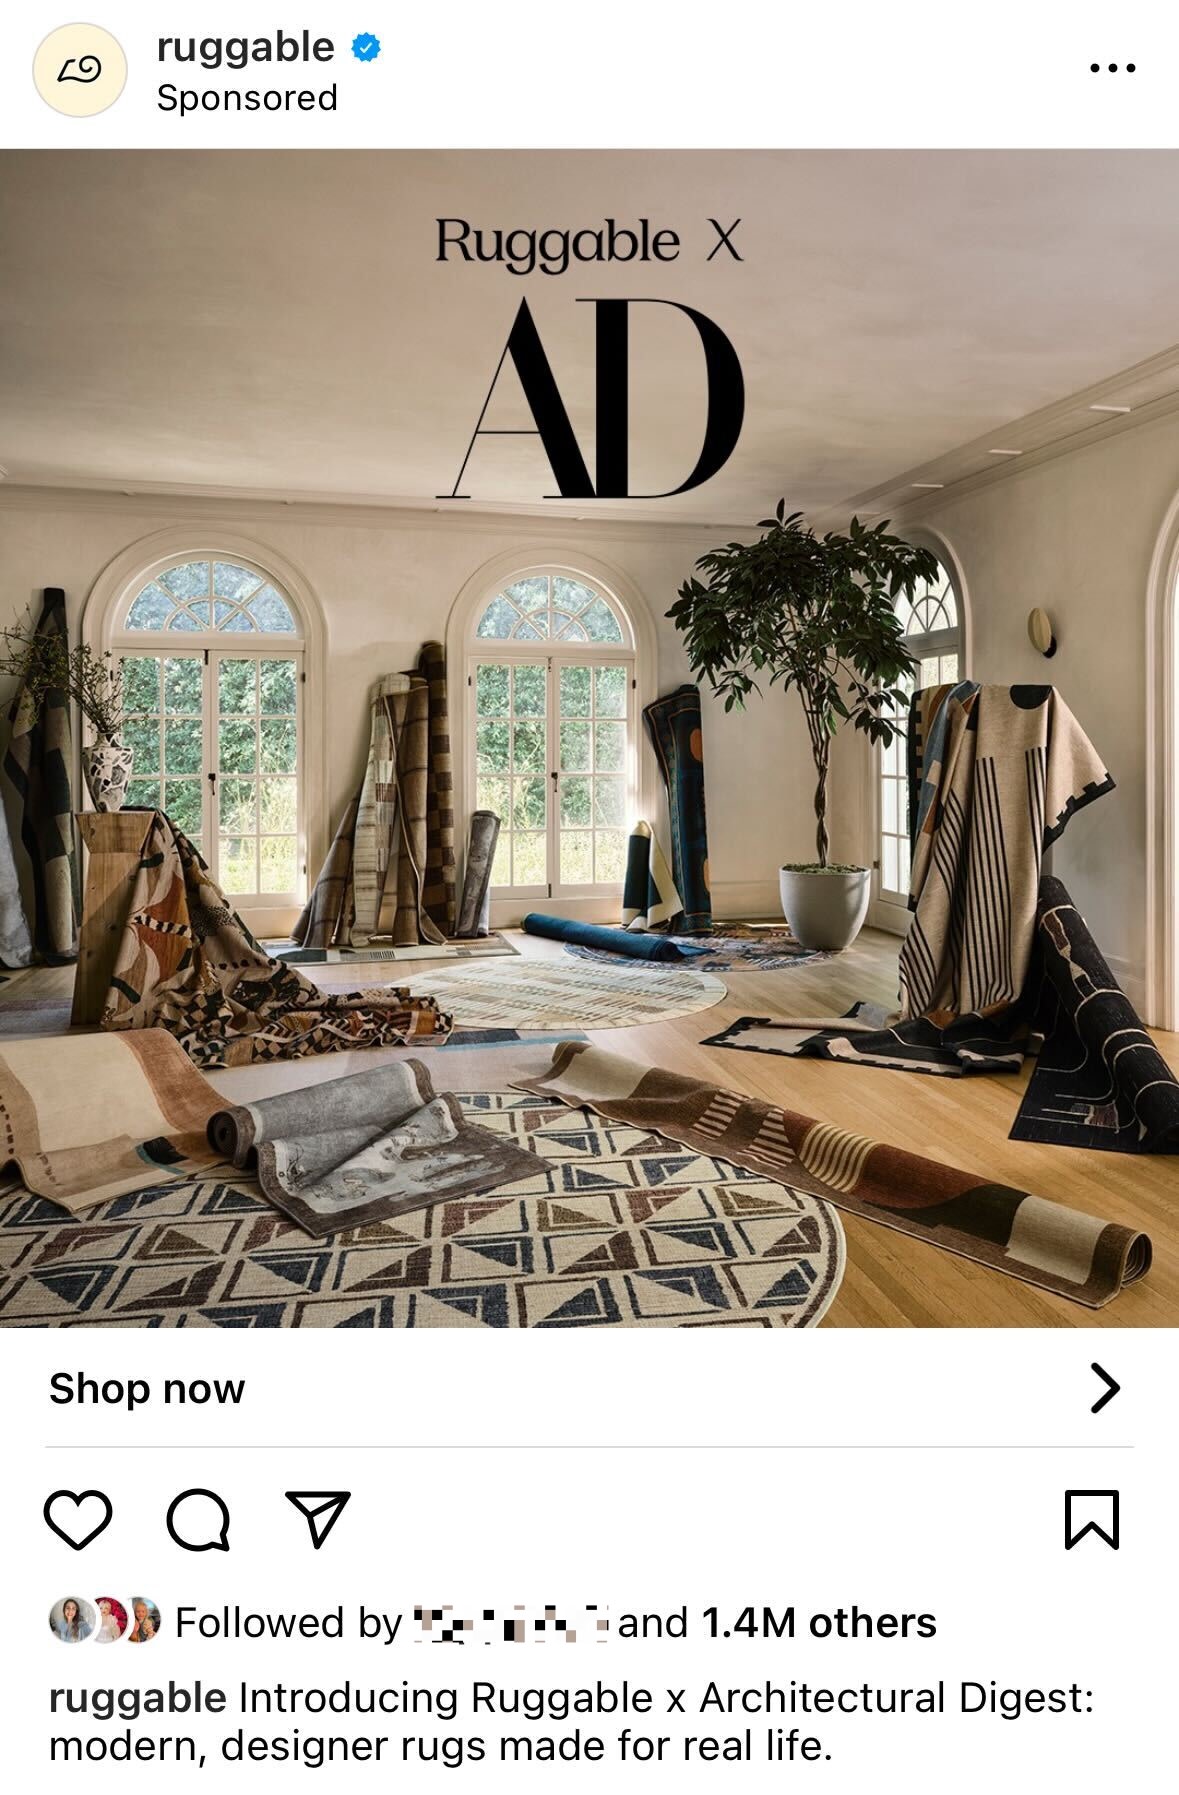 A social media advertising example: A picture of Ruggable rugs introducing the collab with Architectural Digest